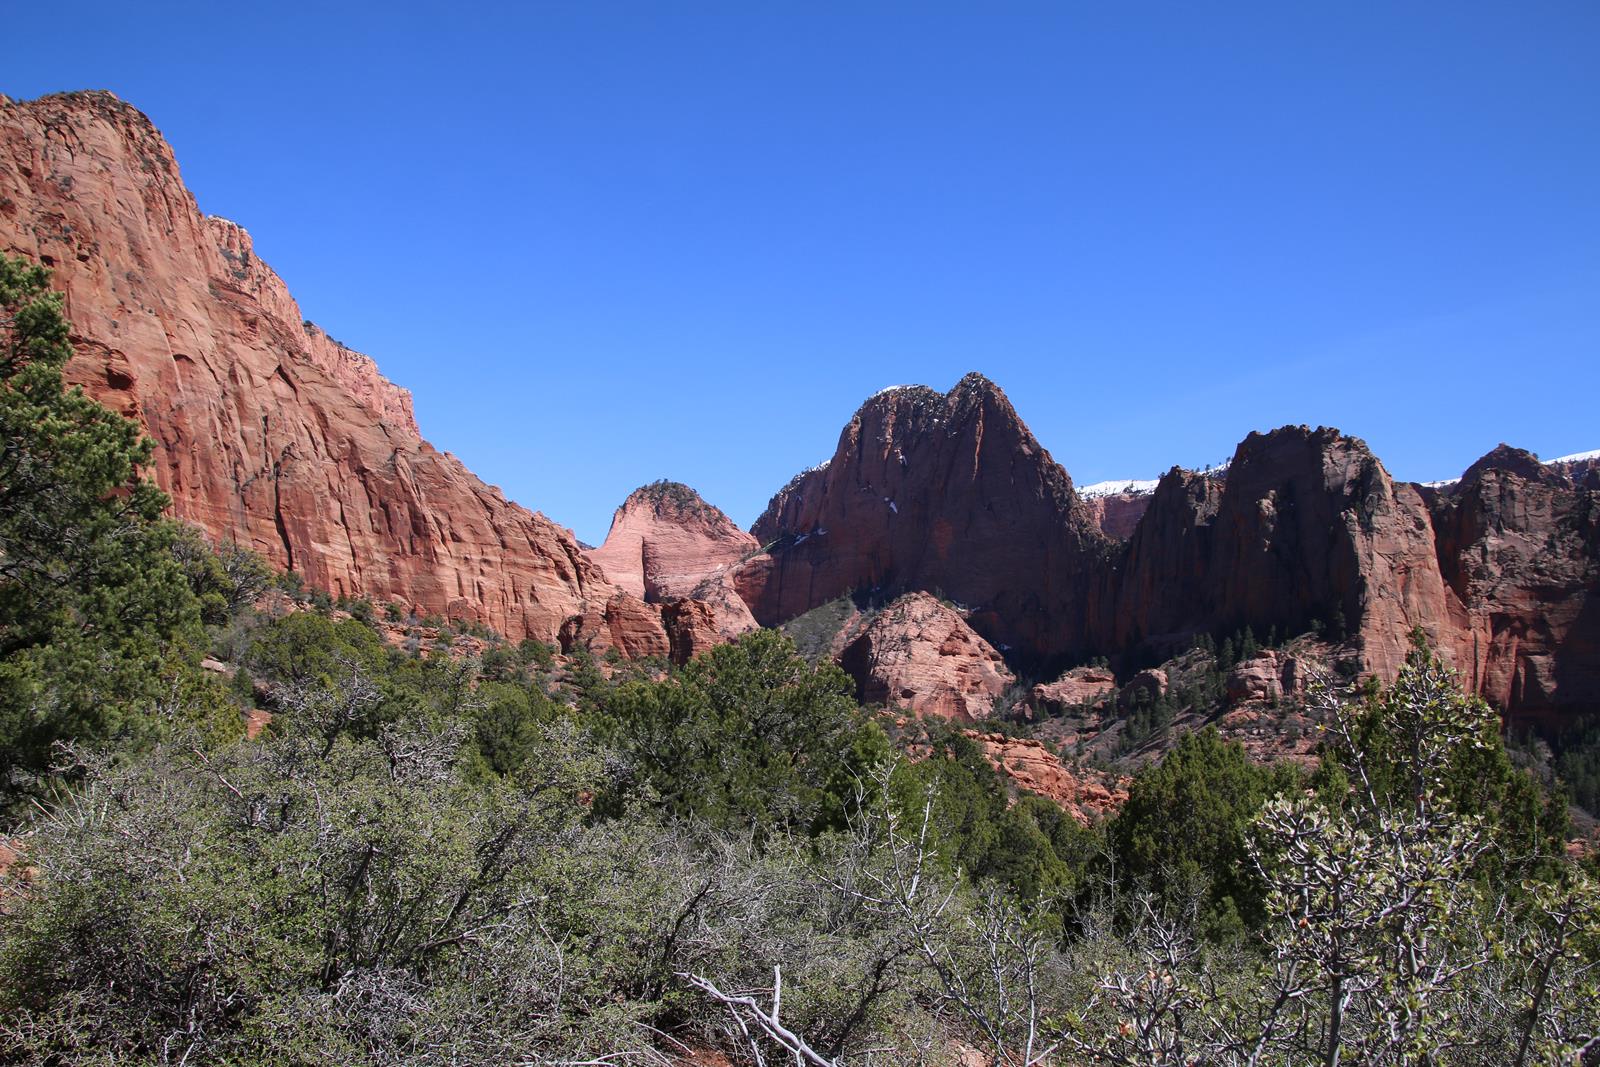 Kolob Canyons, in zion national park